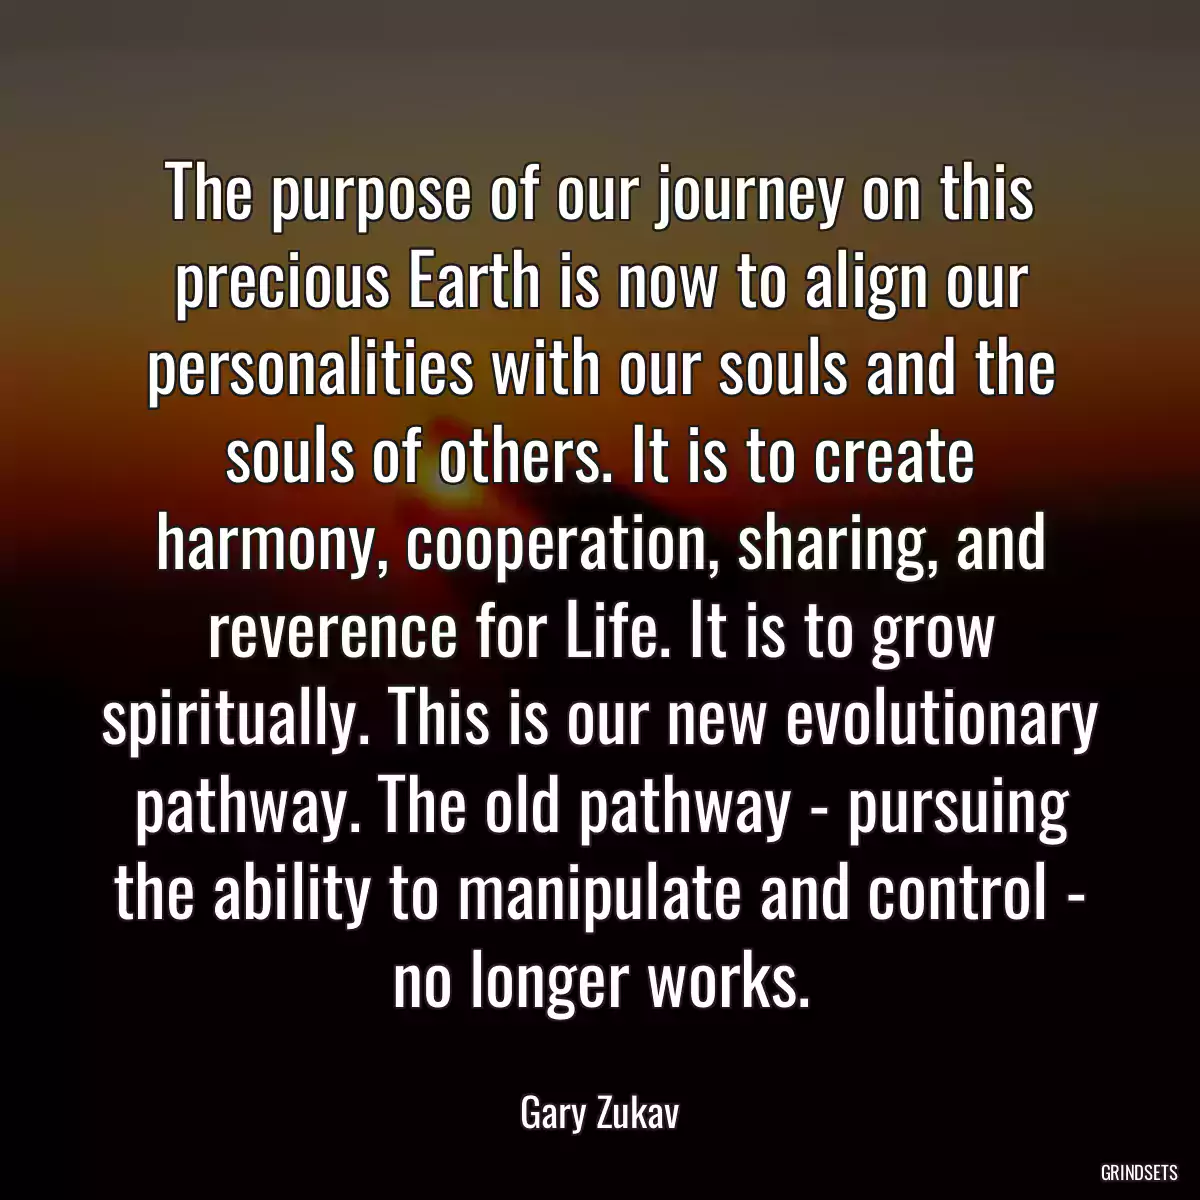 The purpose of our journey on this precious Earth is now to align our personalities with our souls and the souls of others. It is to create harmony, cooperation, sharing, and reverence for Life. It is to grow spiritually. This is our new evolutionary pathway. The old pathway - pursuing the ability to manipulate and control - no longer works.